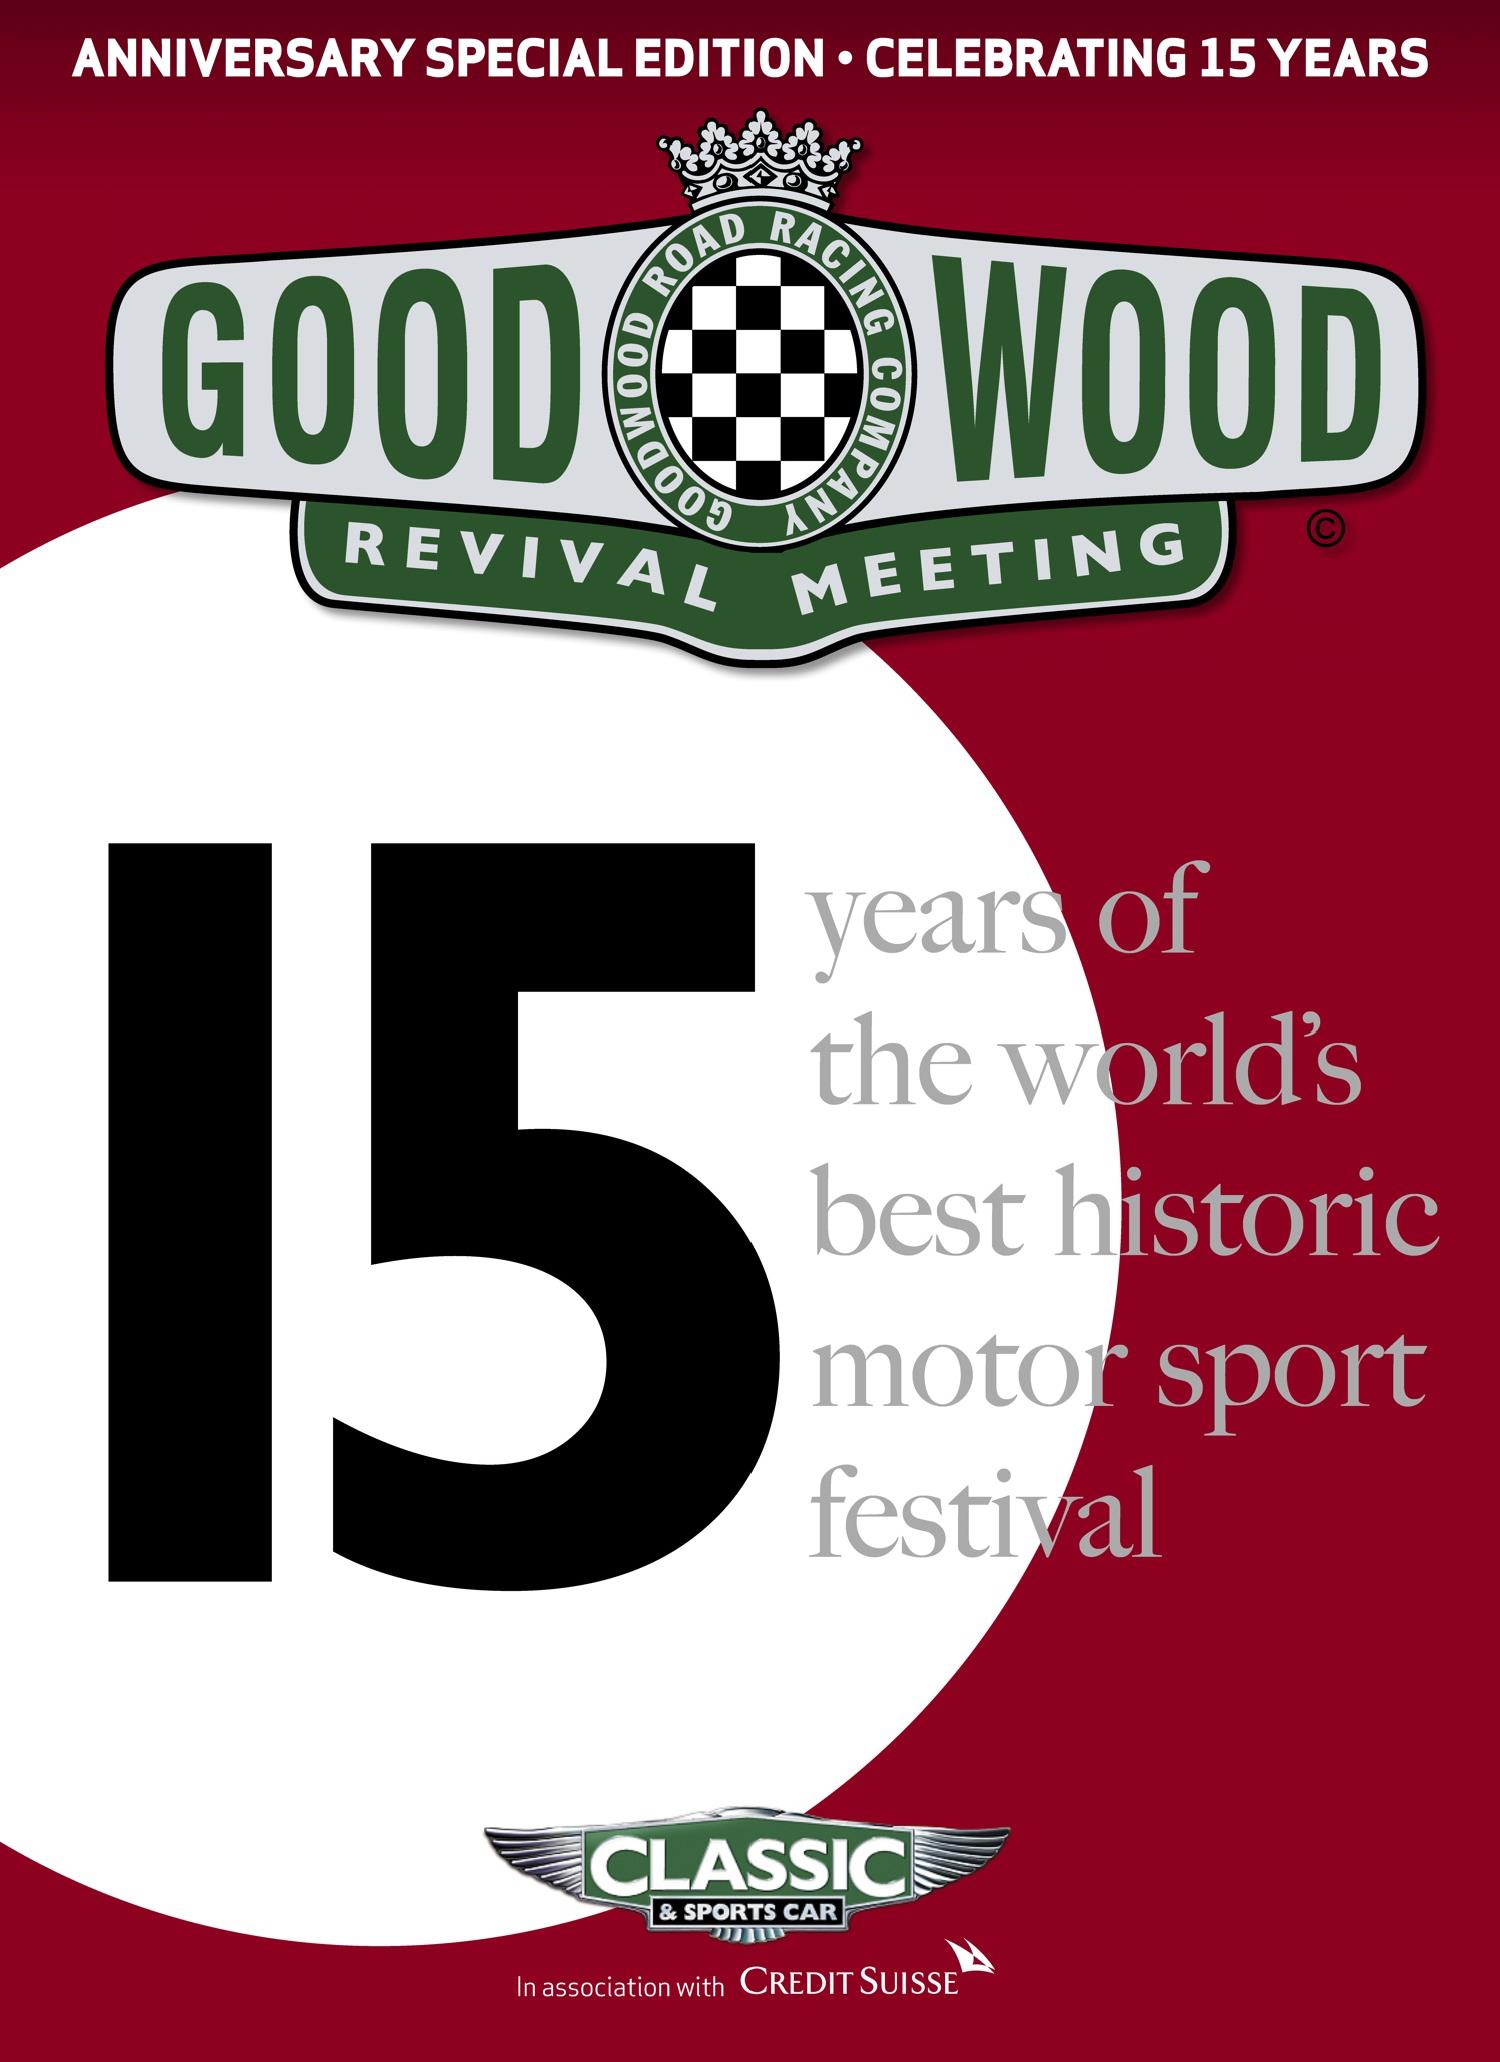 Журнал Classic Cars Specials: Goodwood Revival Meeting